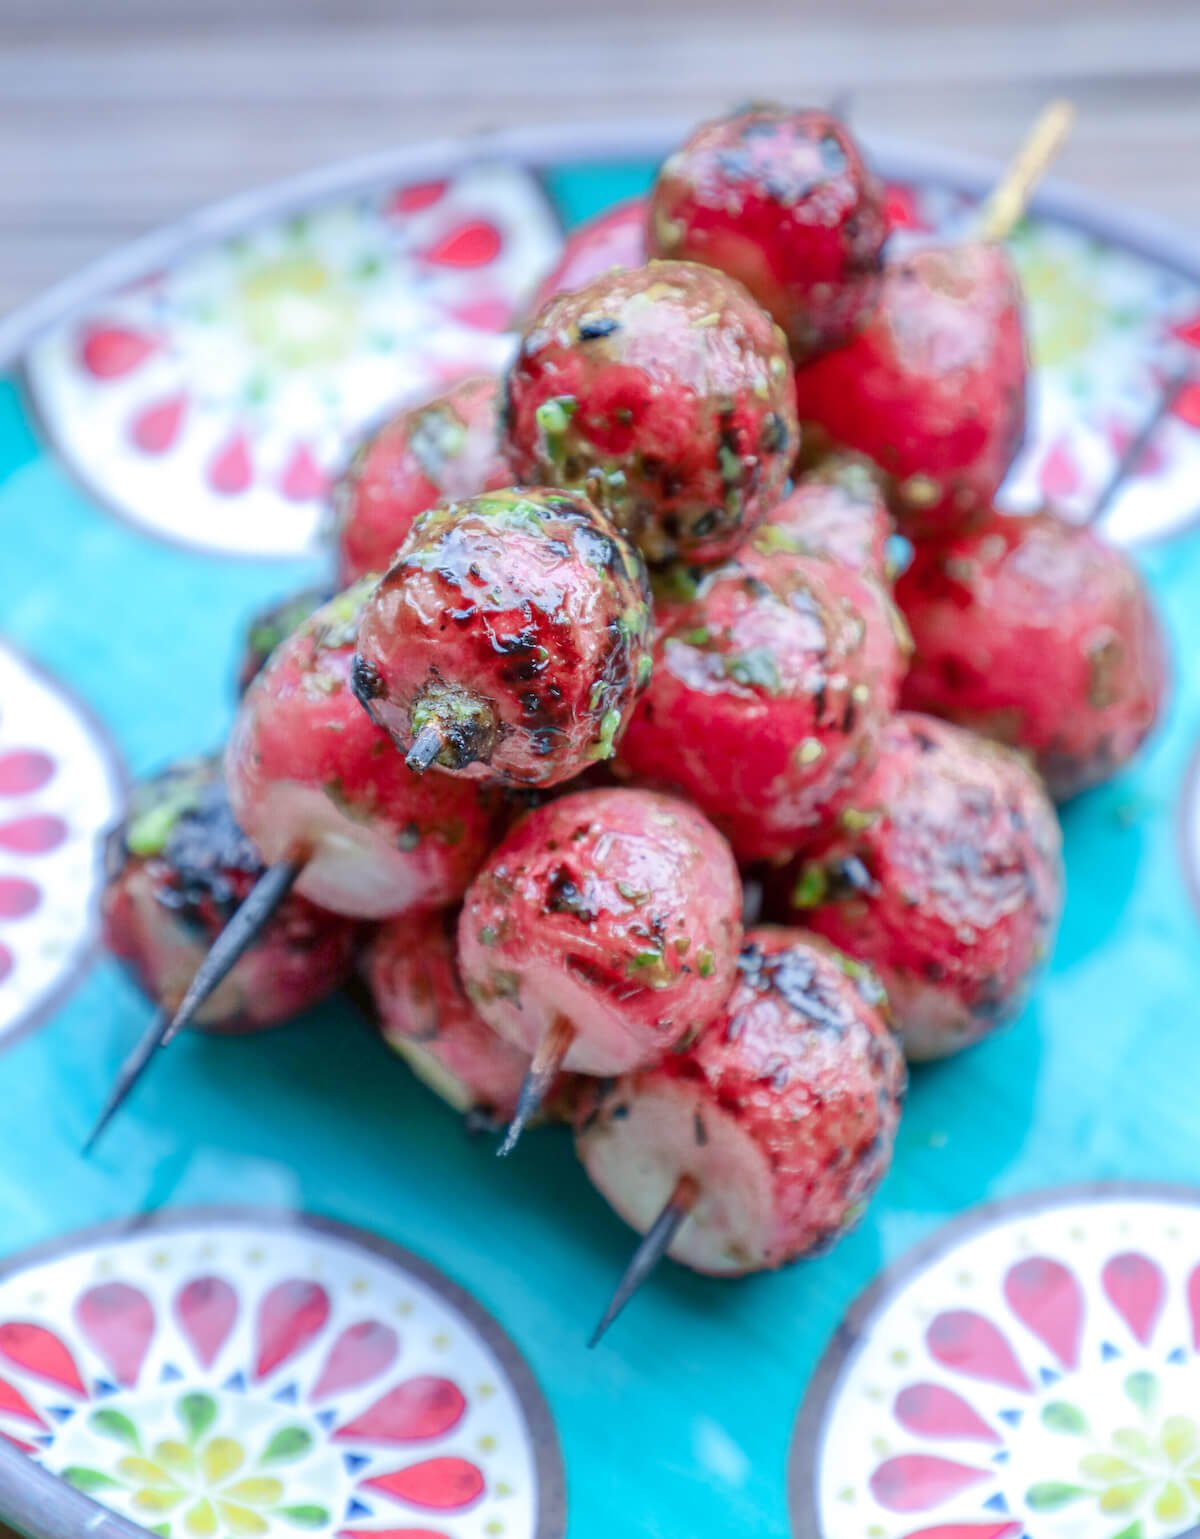 Keto Grilled Radish Skewers with Garlic & Herb Butter